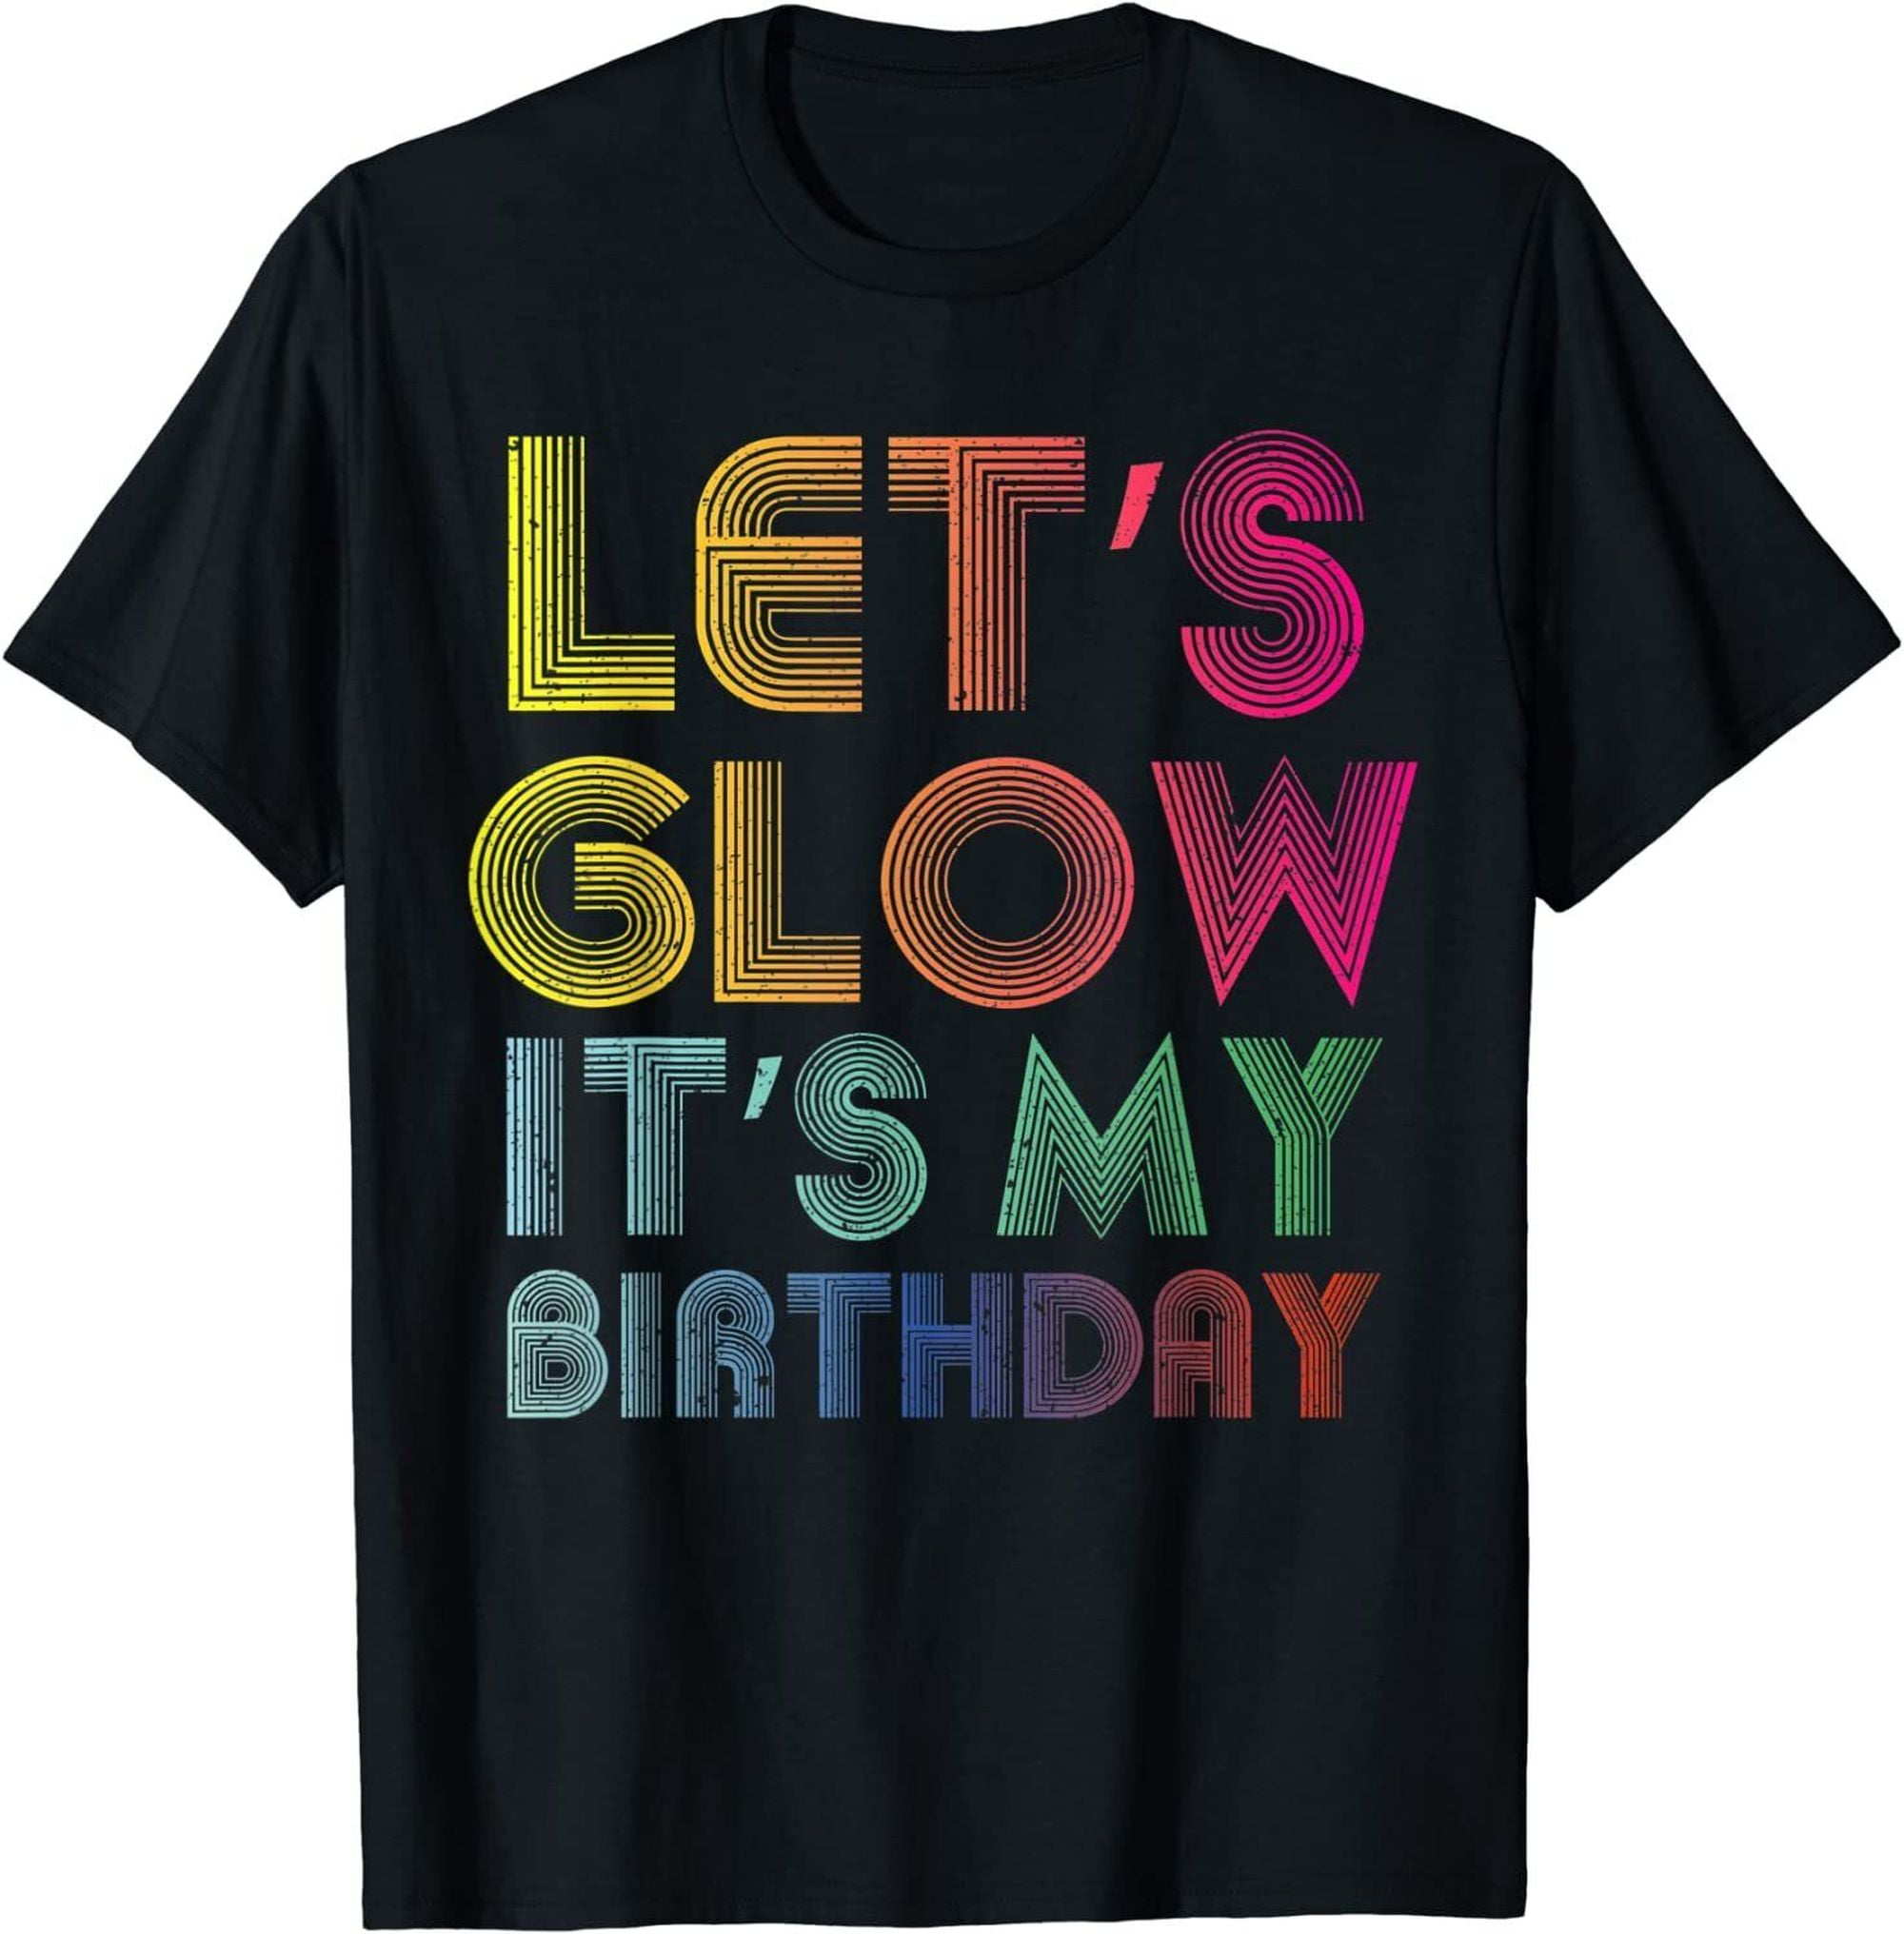 Shine Bright on Your Birthday with a Hilarious Glow Party T-Shirt ...